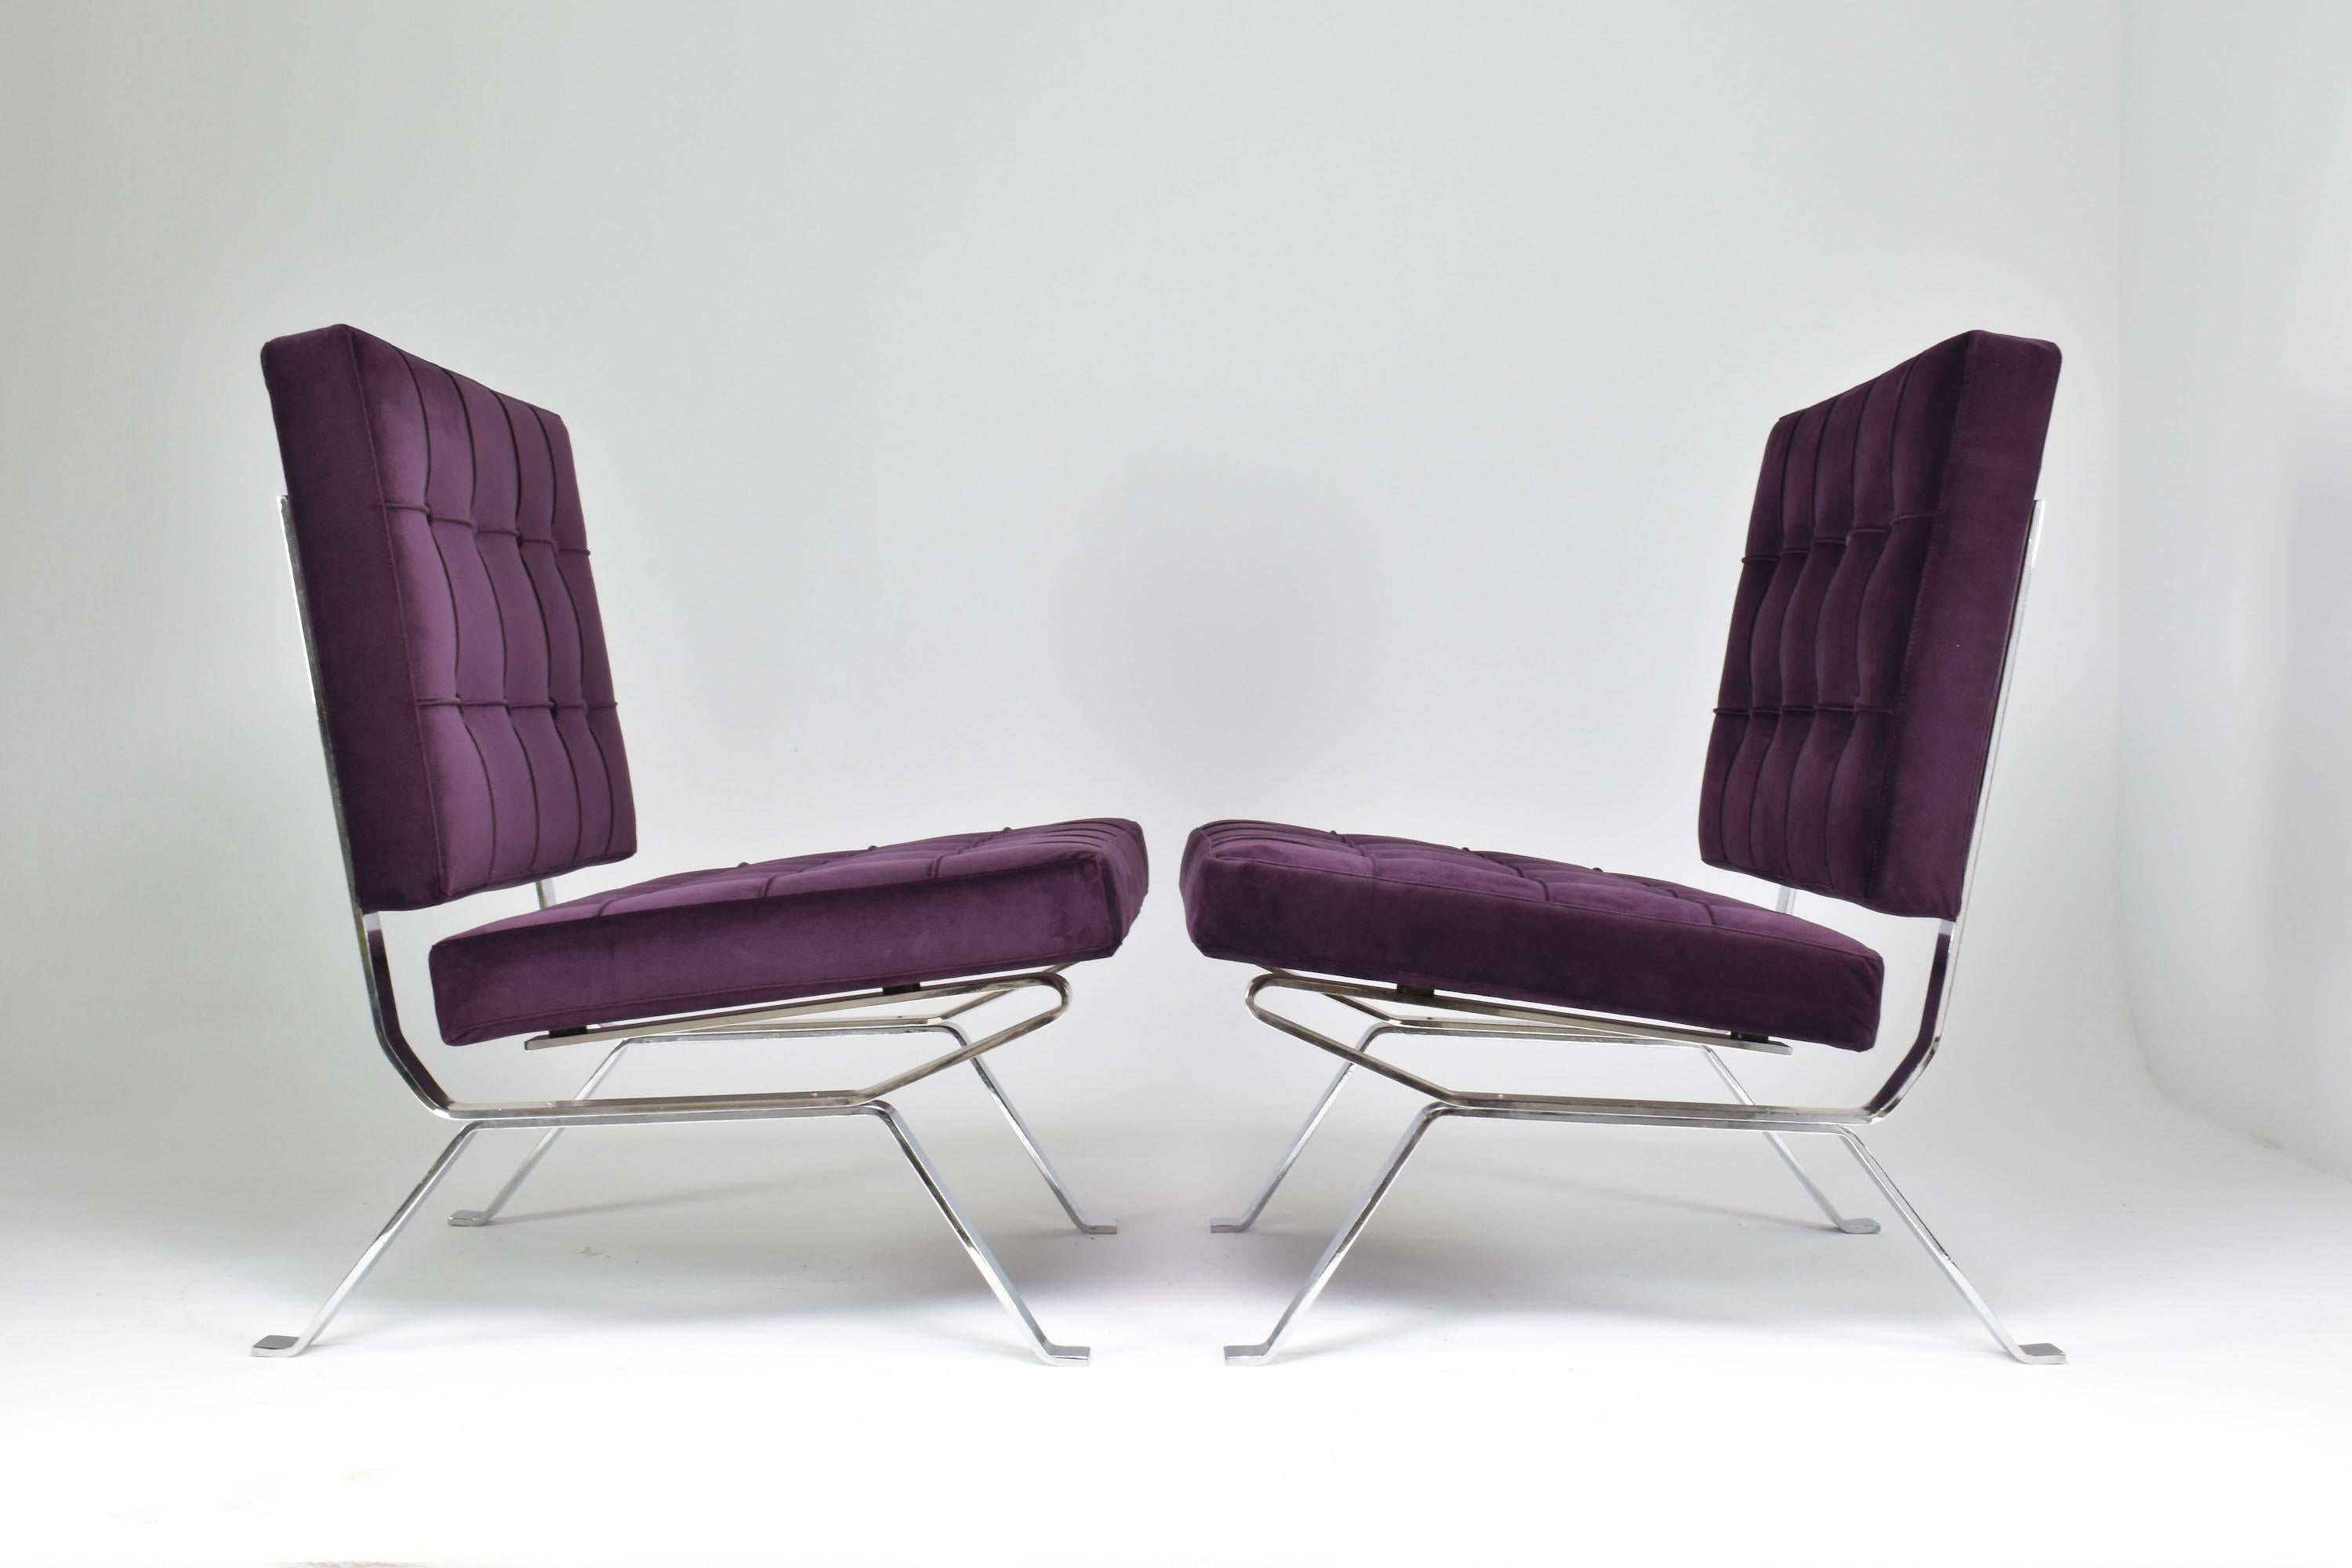 Pair of Italian Midcentury Dione Gastone Rinaldi Lounge Chairs, 1950s For Sale 5